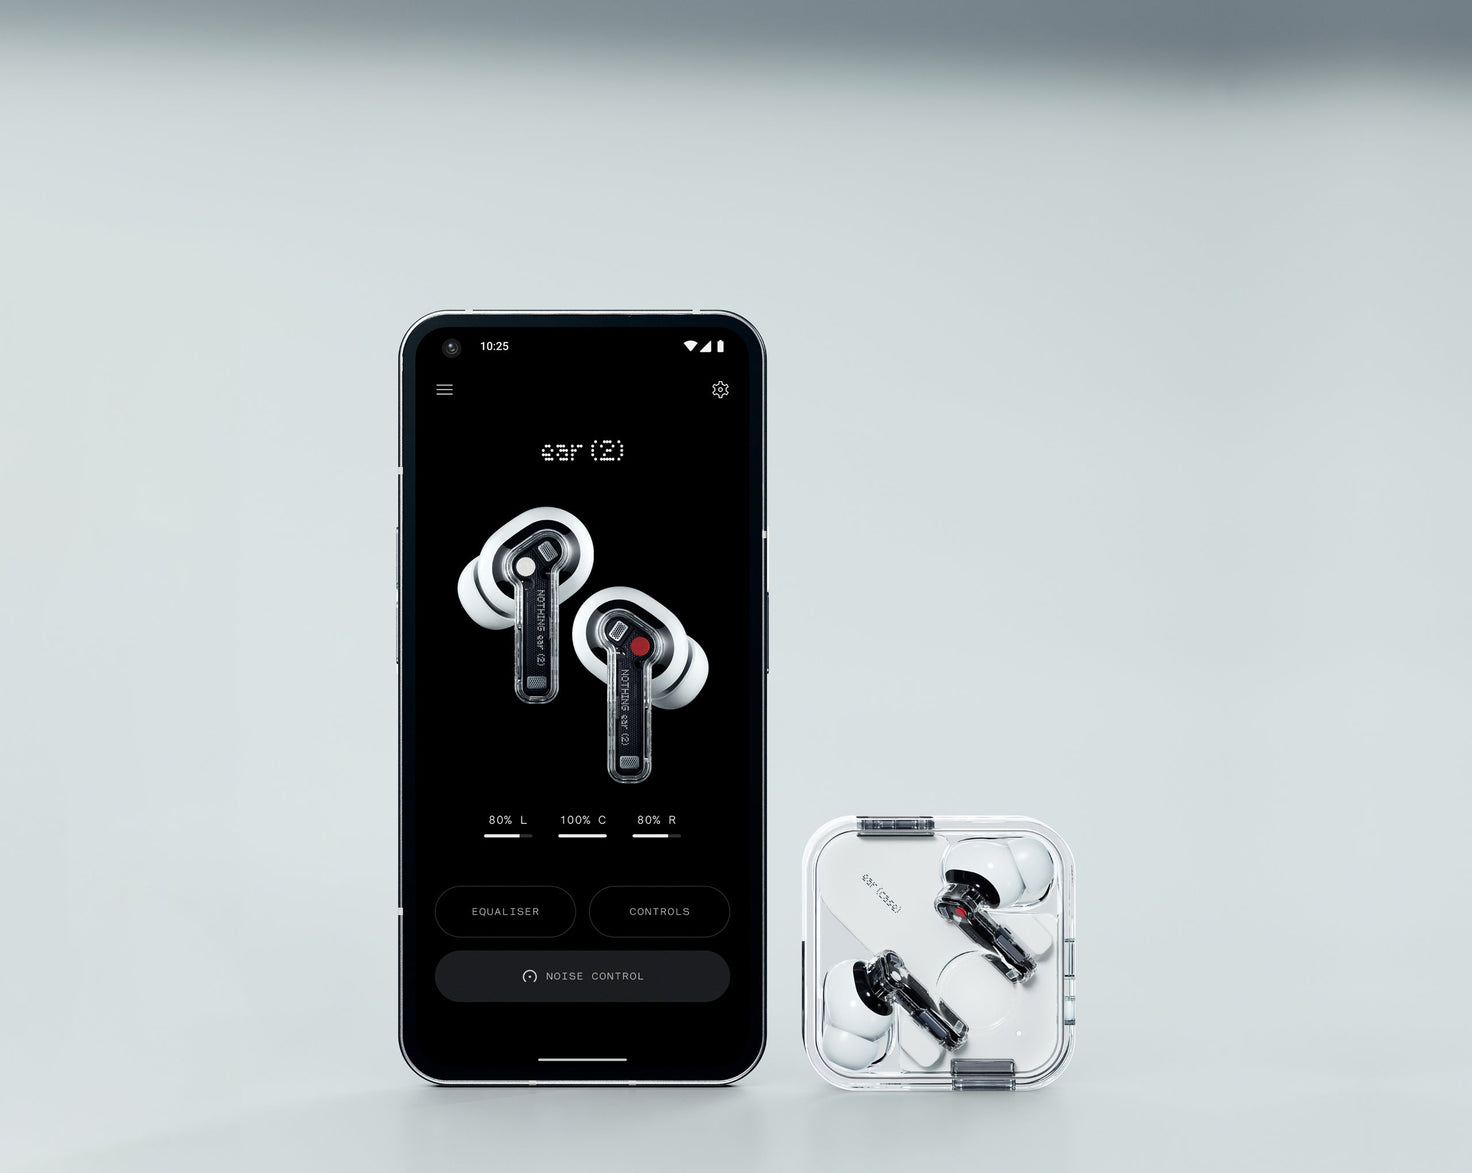 Nothing's Ear 2 buds are available starting today